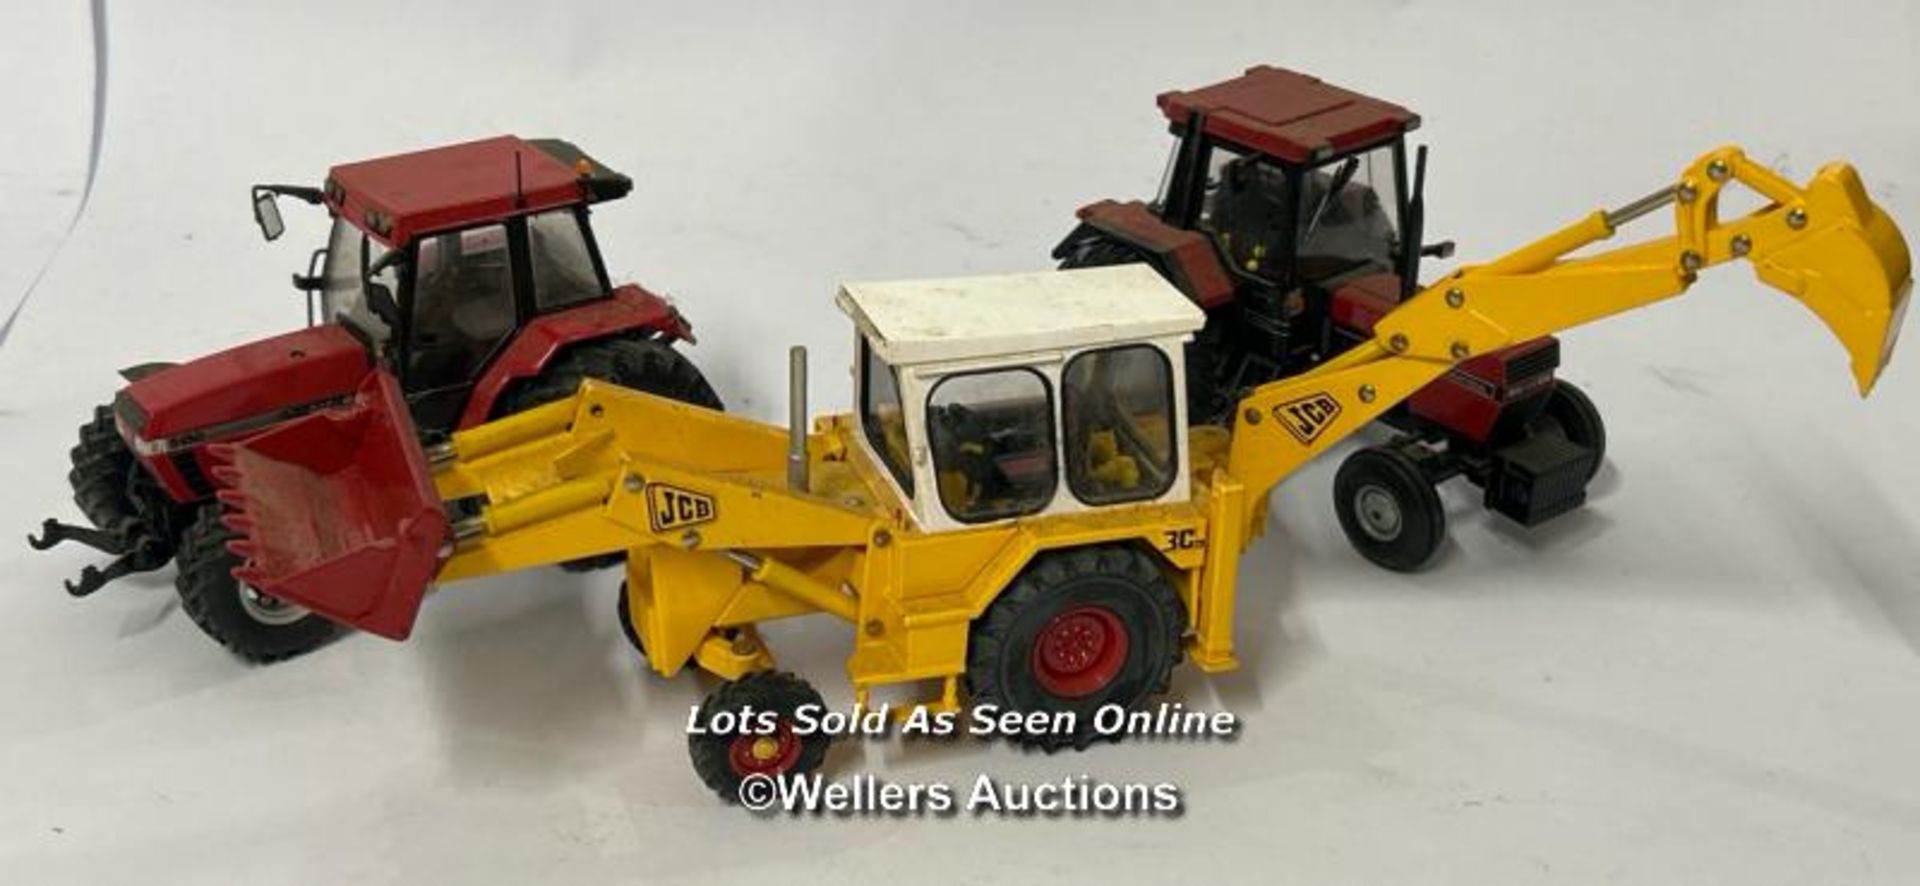 Britain's JCB digger no. 42905 with two model tractors / AN4 - Image 8 of 9